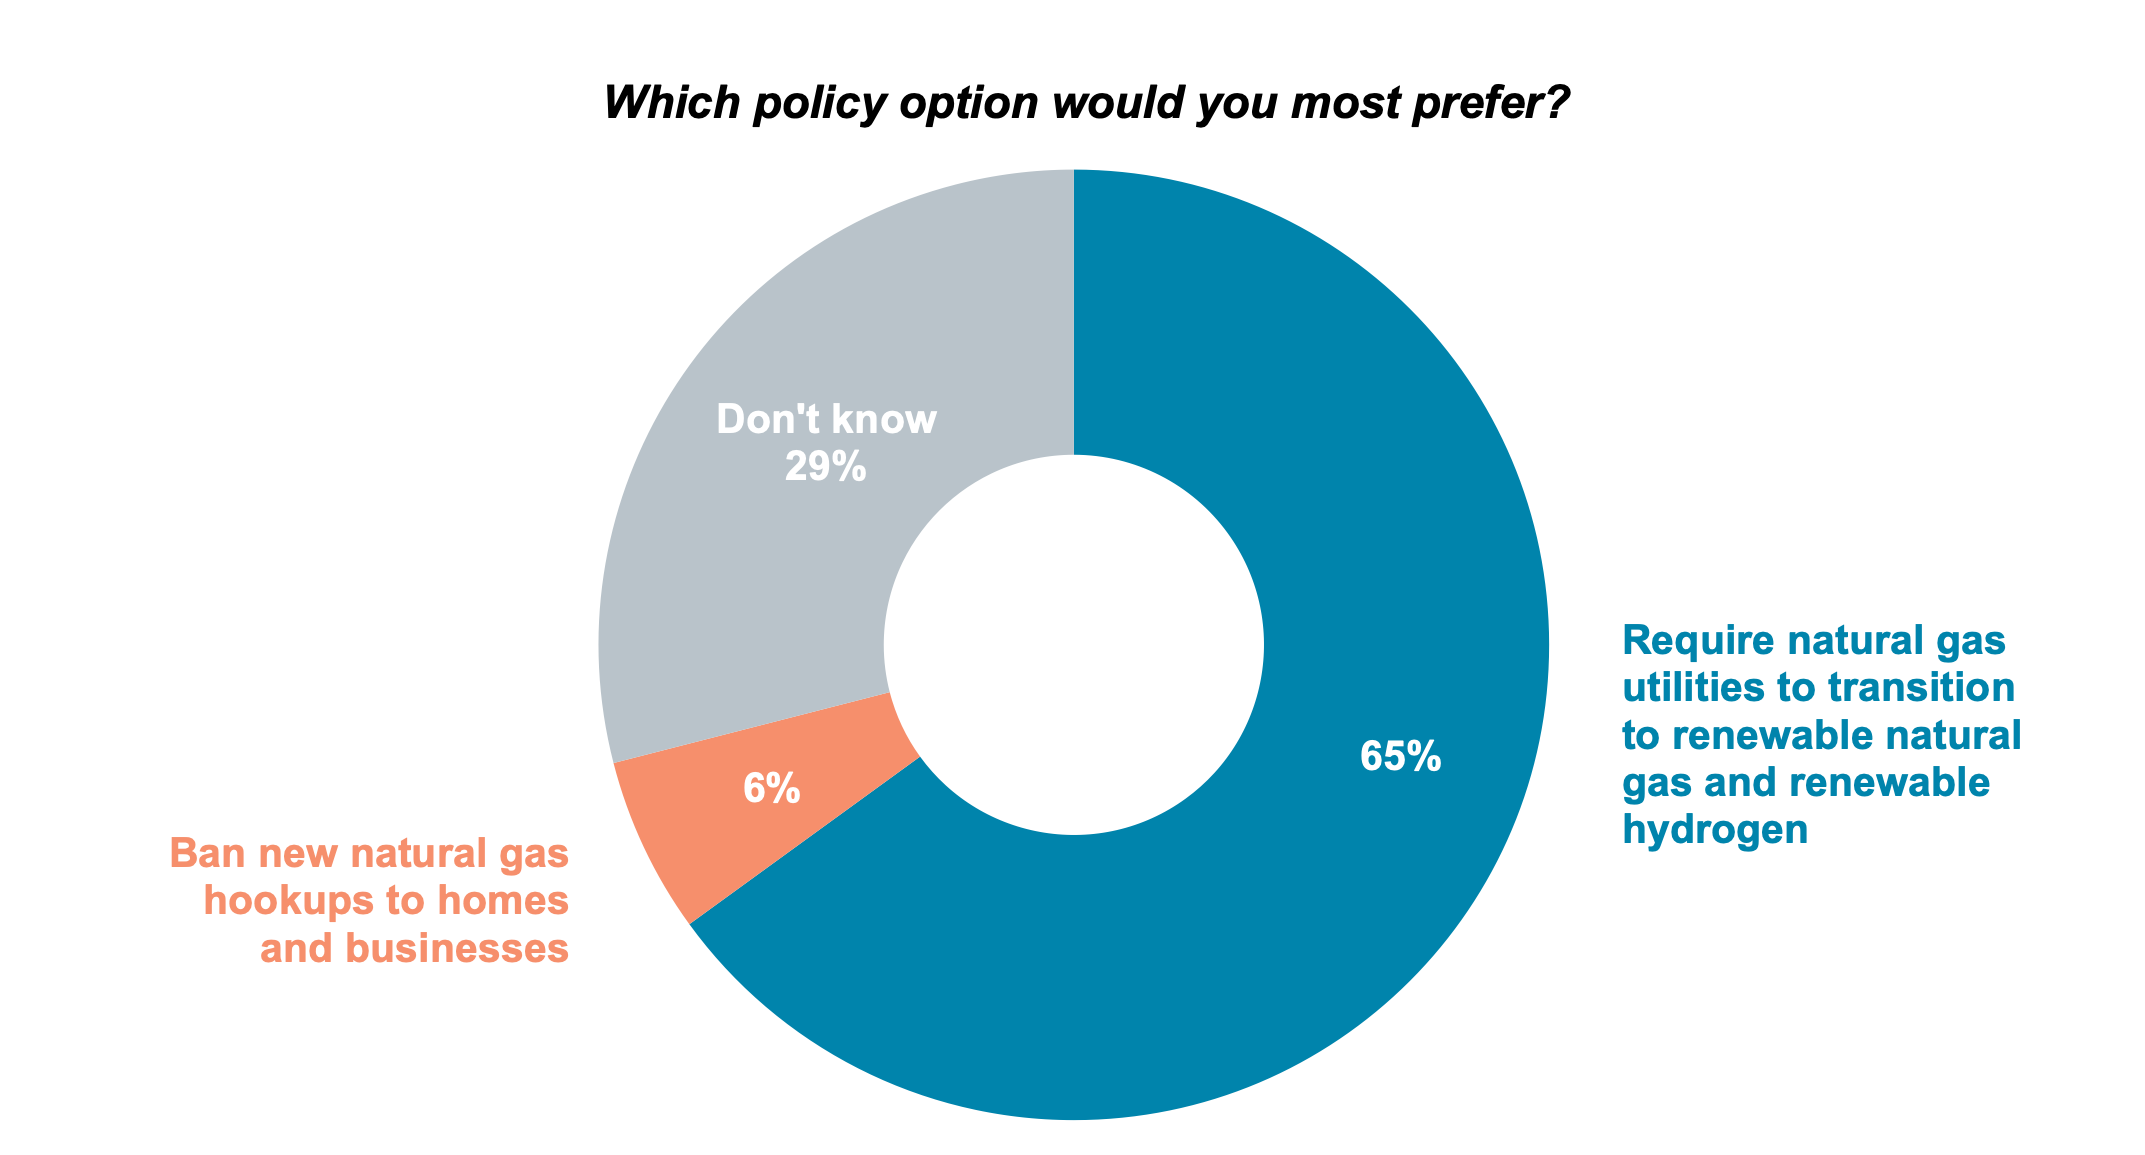 Pie chart results from asking Oregon residents which policy option they would most support, banning new natural gas hookups to homes and businesses or requiring natural gas utilities to transition to renewable natural gas and renewable hydrogen.